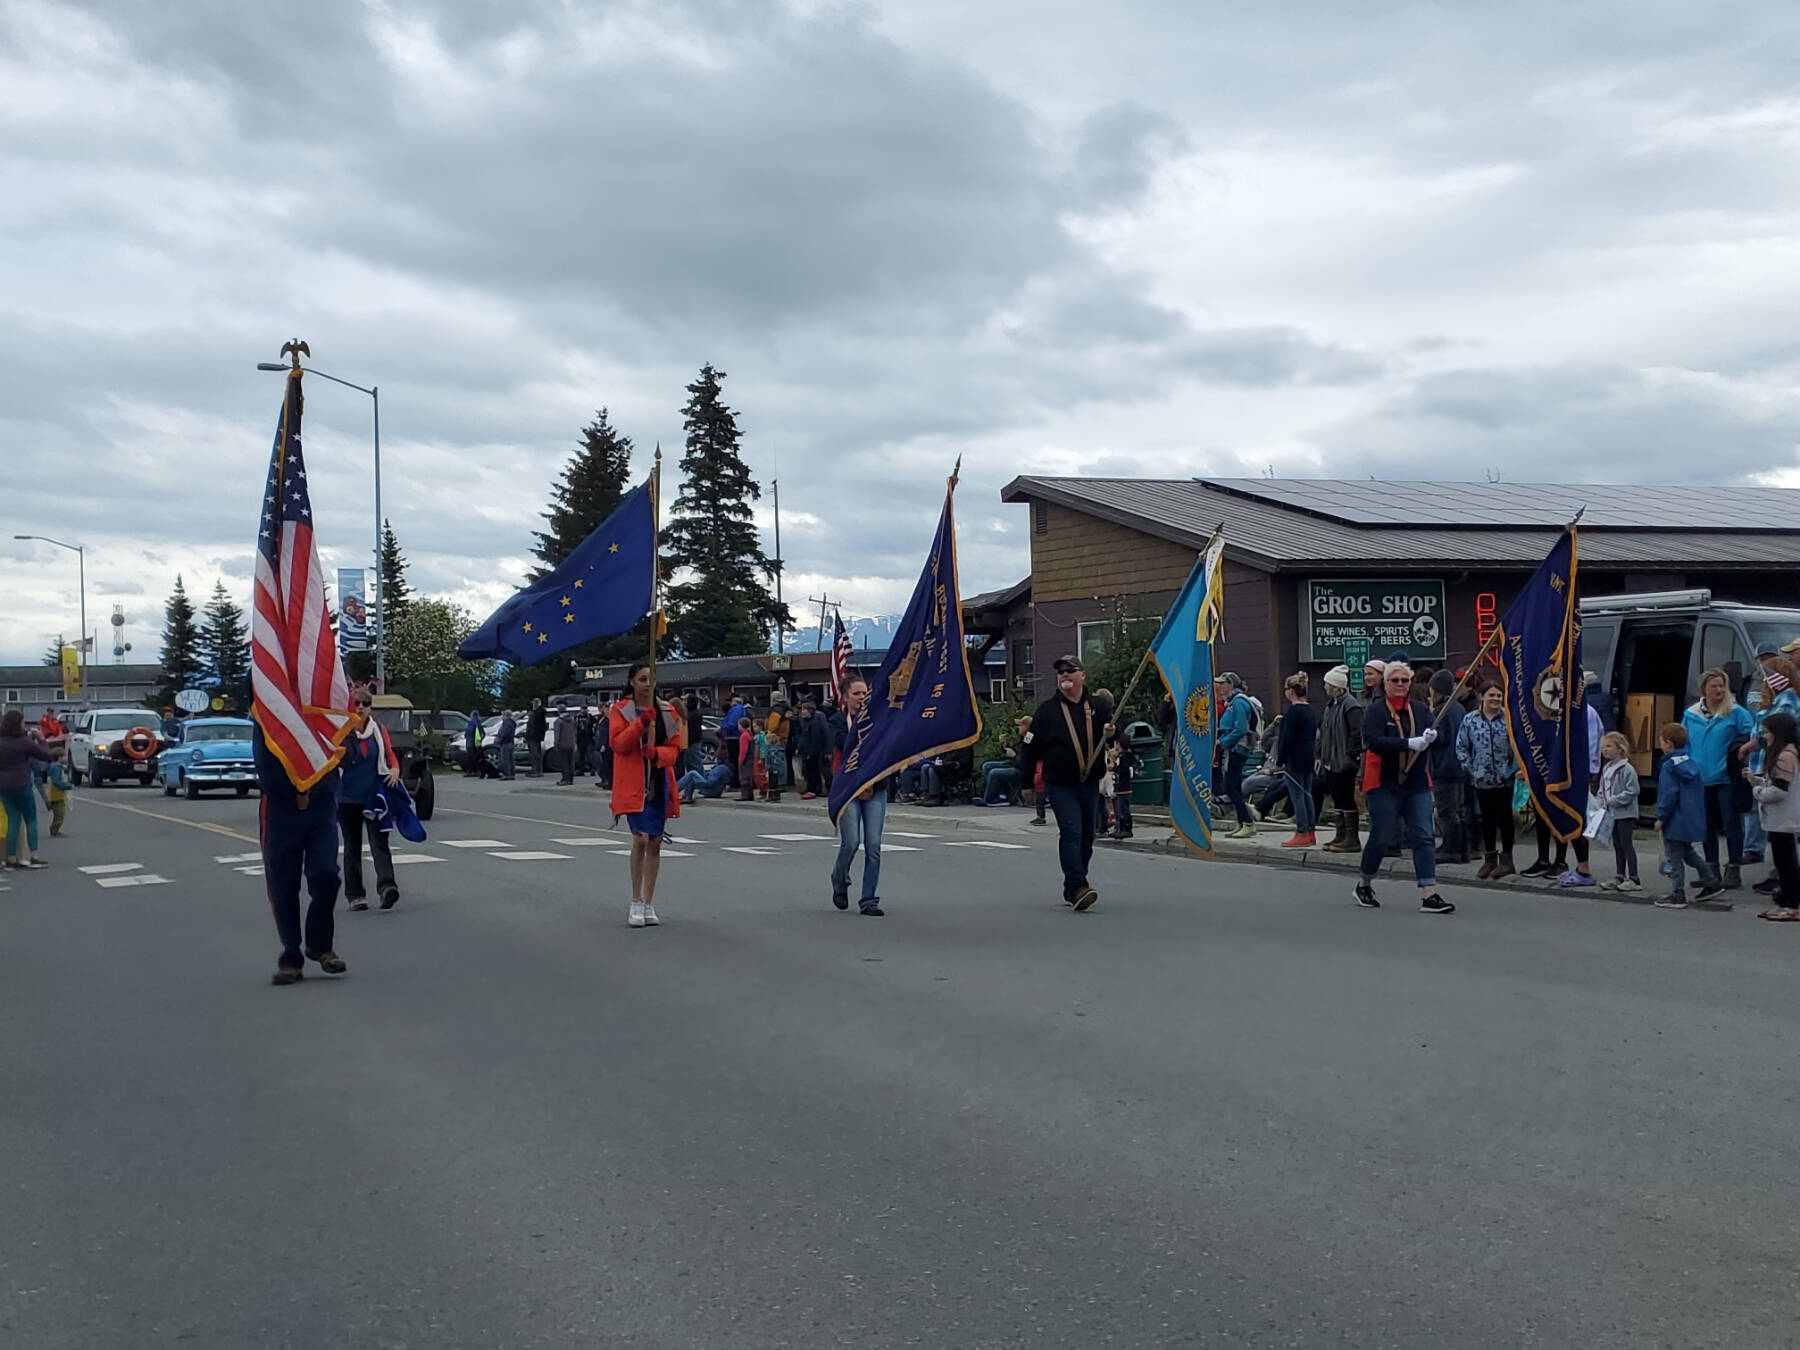 The American Legion, winner of the Red Lantern Award, walks down Pioneer Avenue during the “Seas the Day” Fourth of July parade on Tuesday, July 4, 2023 in Homer, Alaska. (Delcenia Cosman/Homer News)